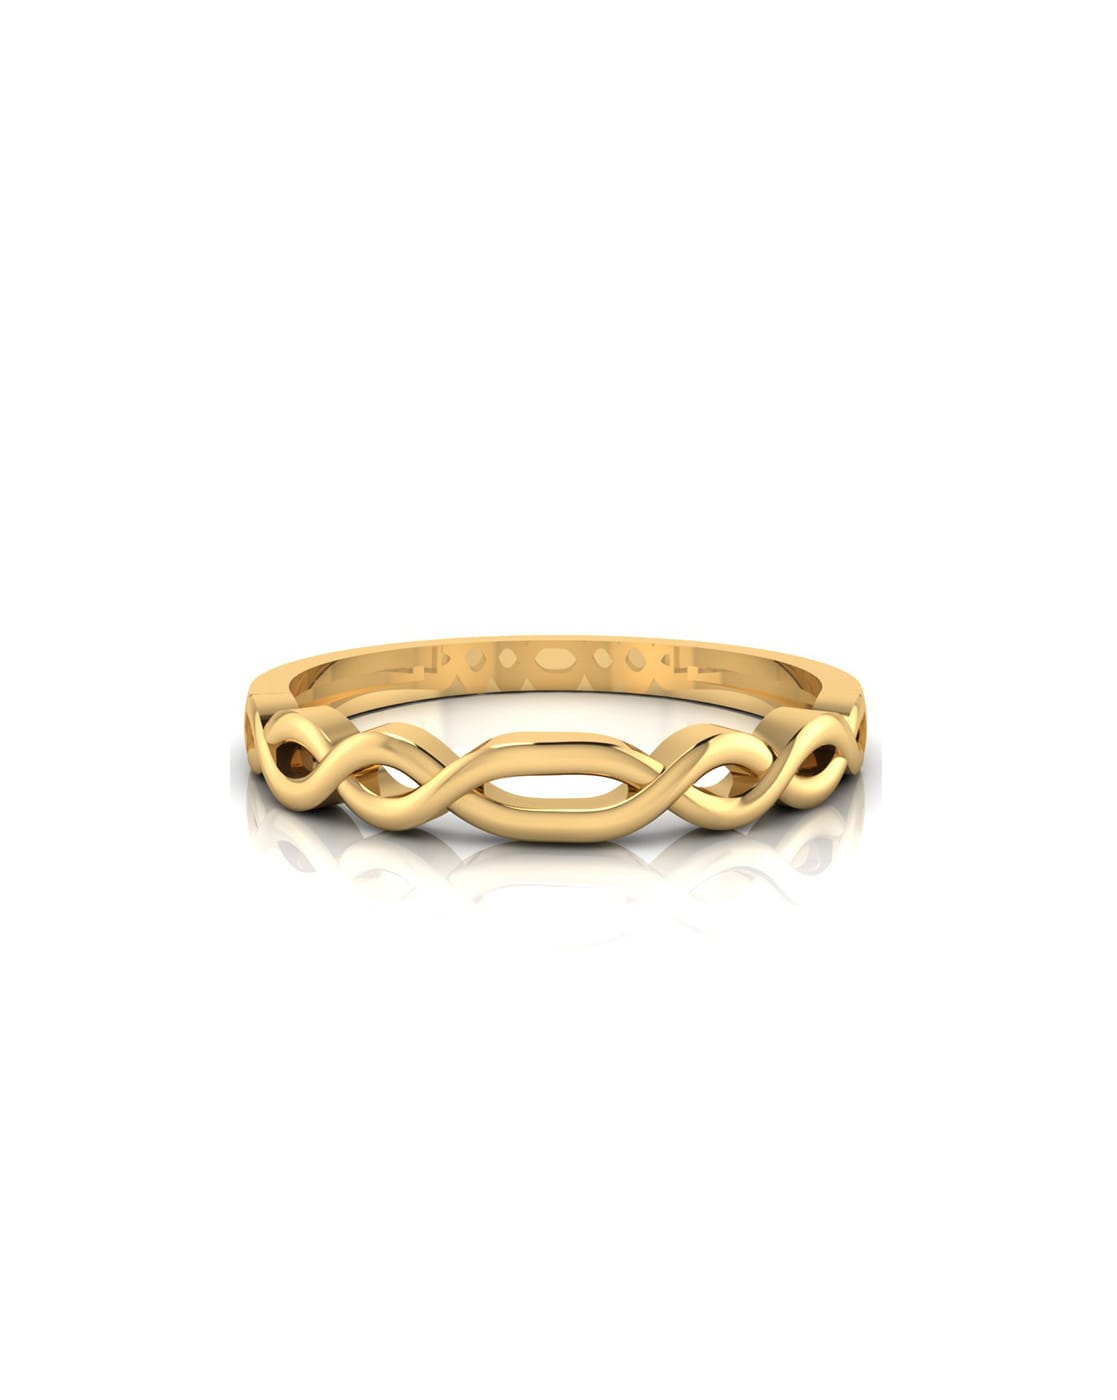 Gold Ring For Women At Dishis Jewels